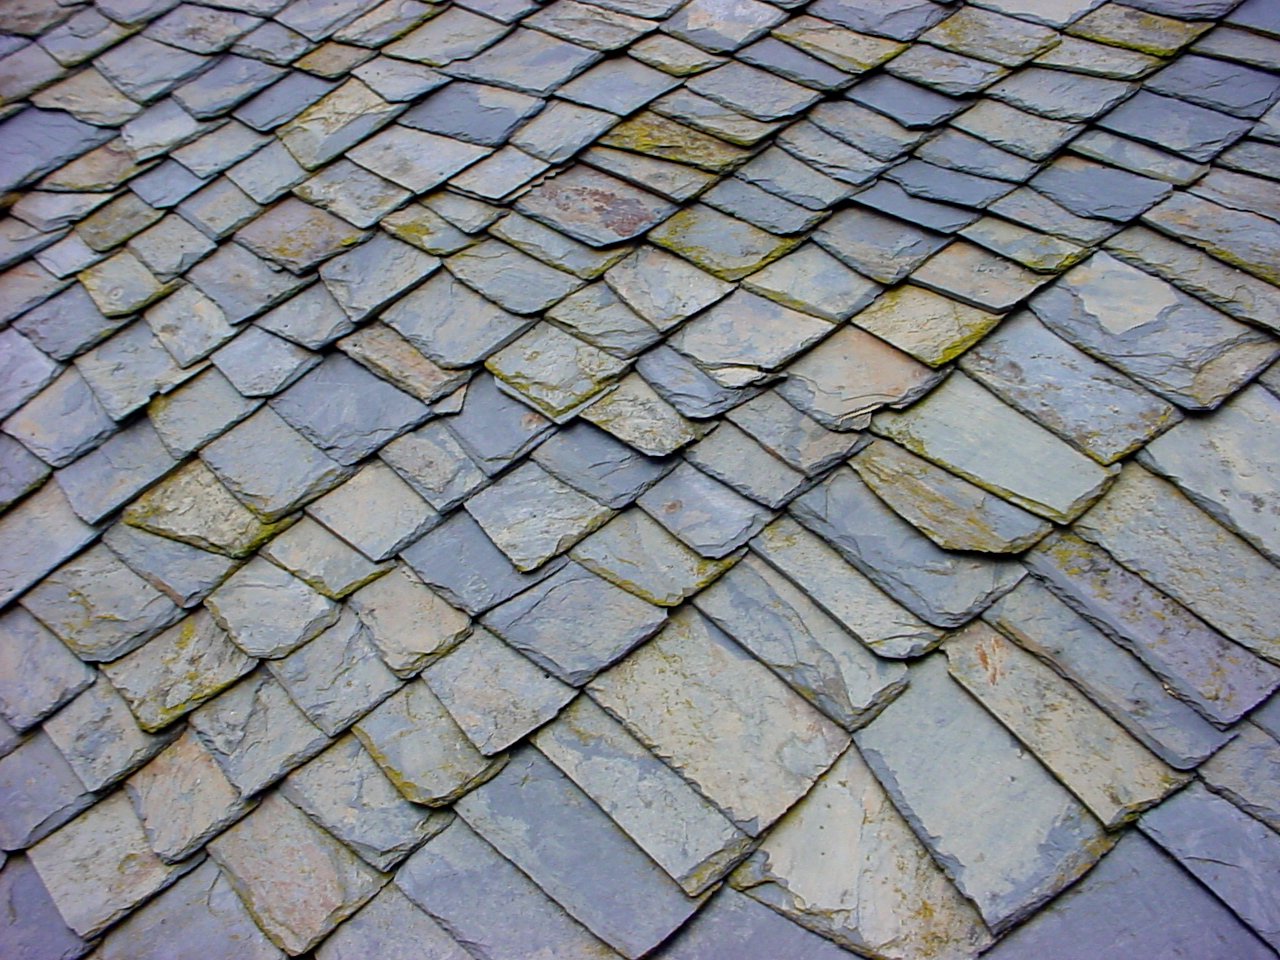 a brick roof with slate stones laying across it